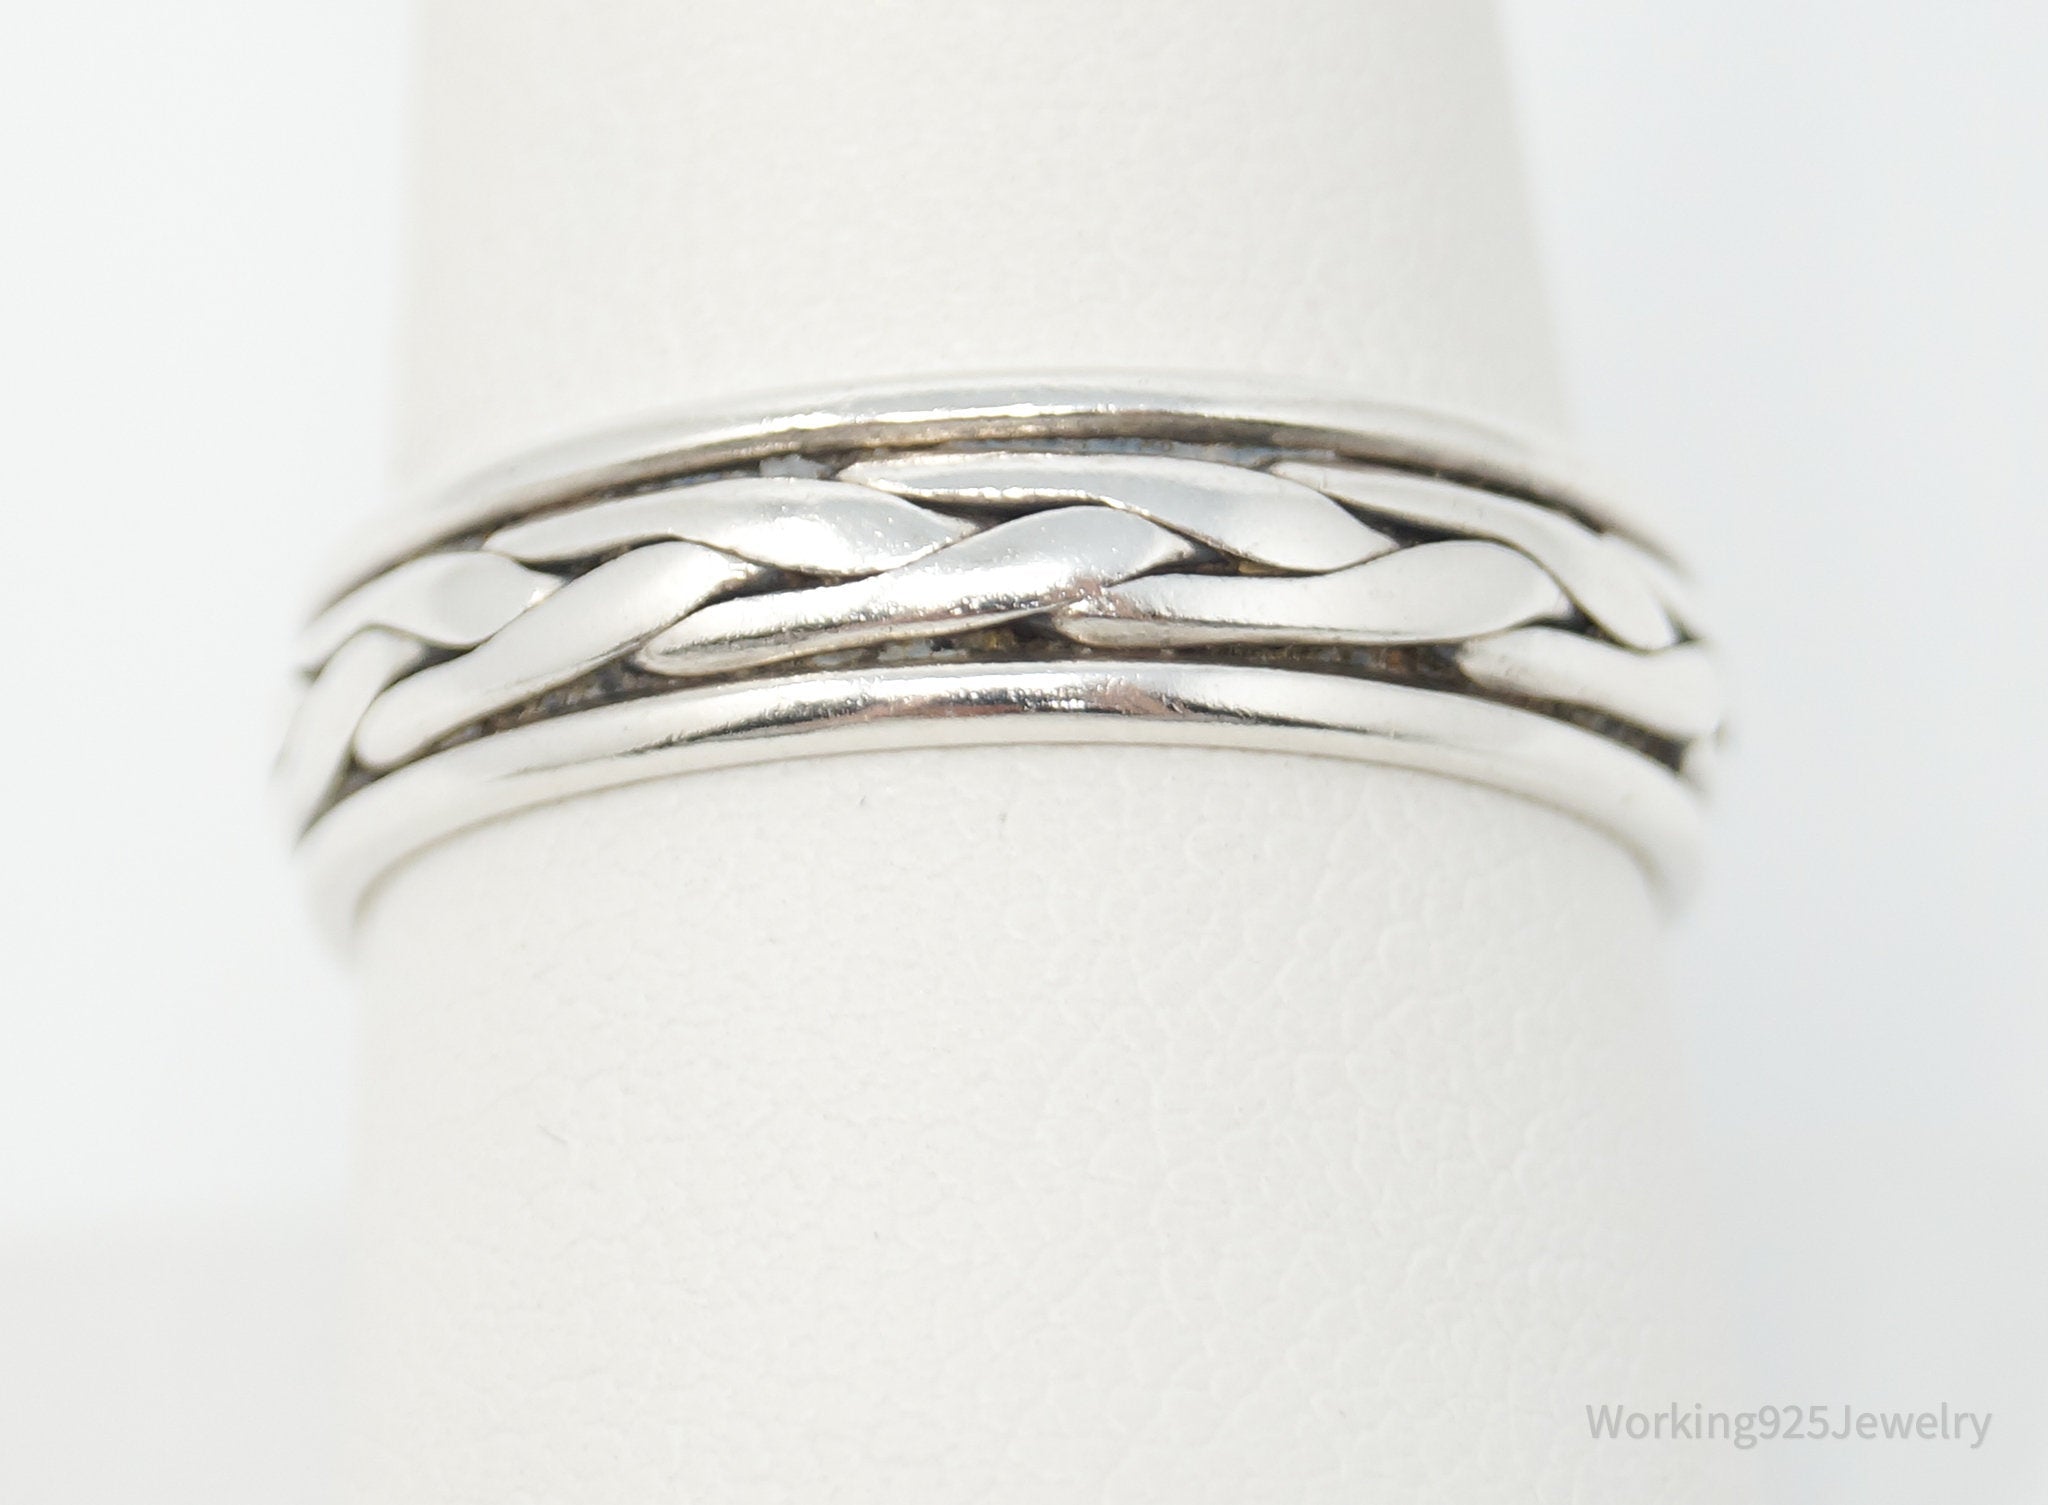 Vintage Weave Braid Rope Sterling Silver Band Ring - Size 11